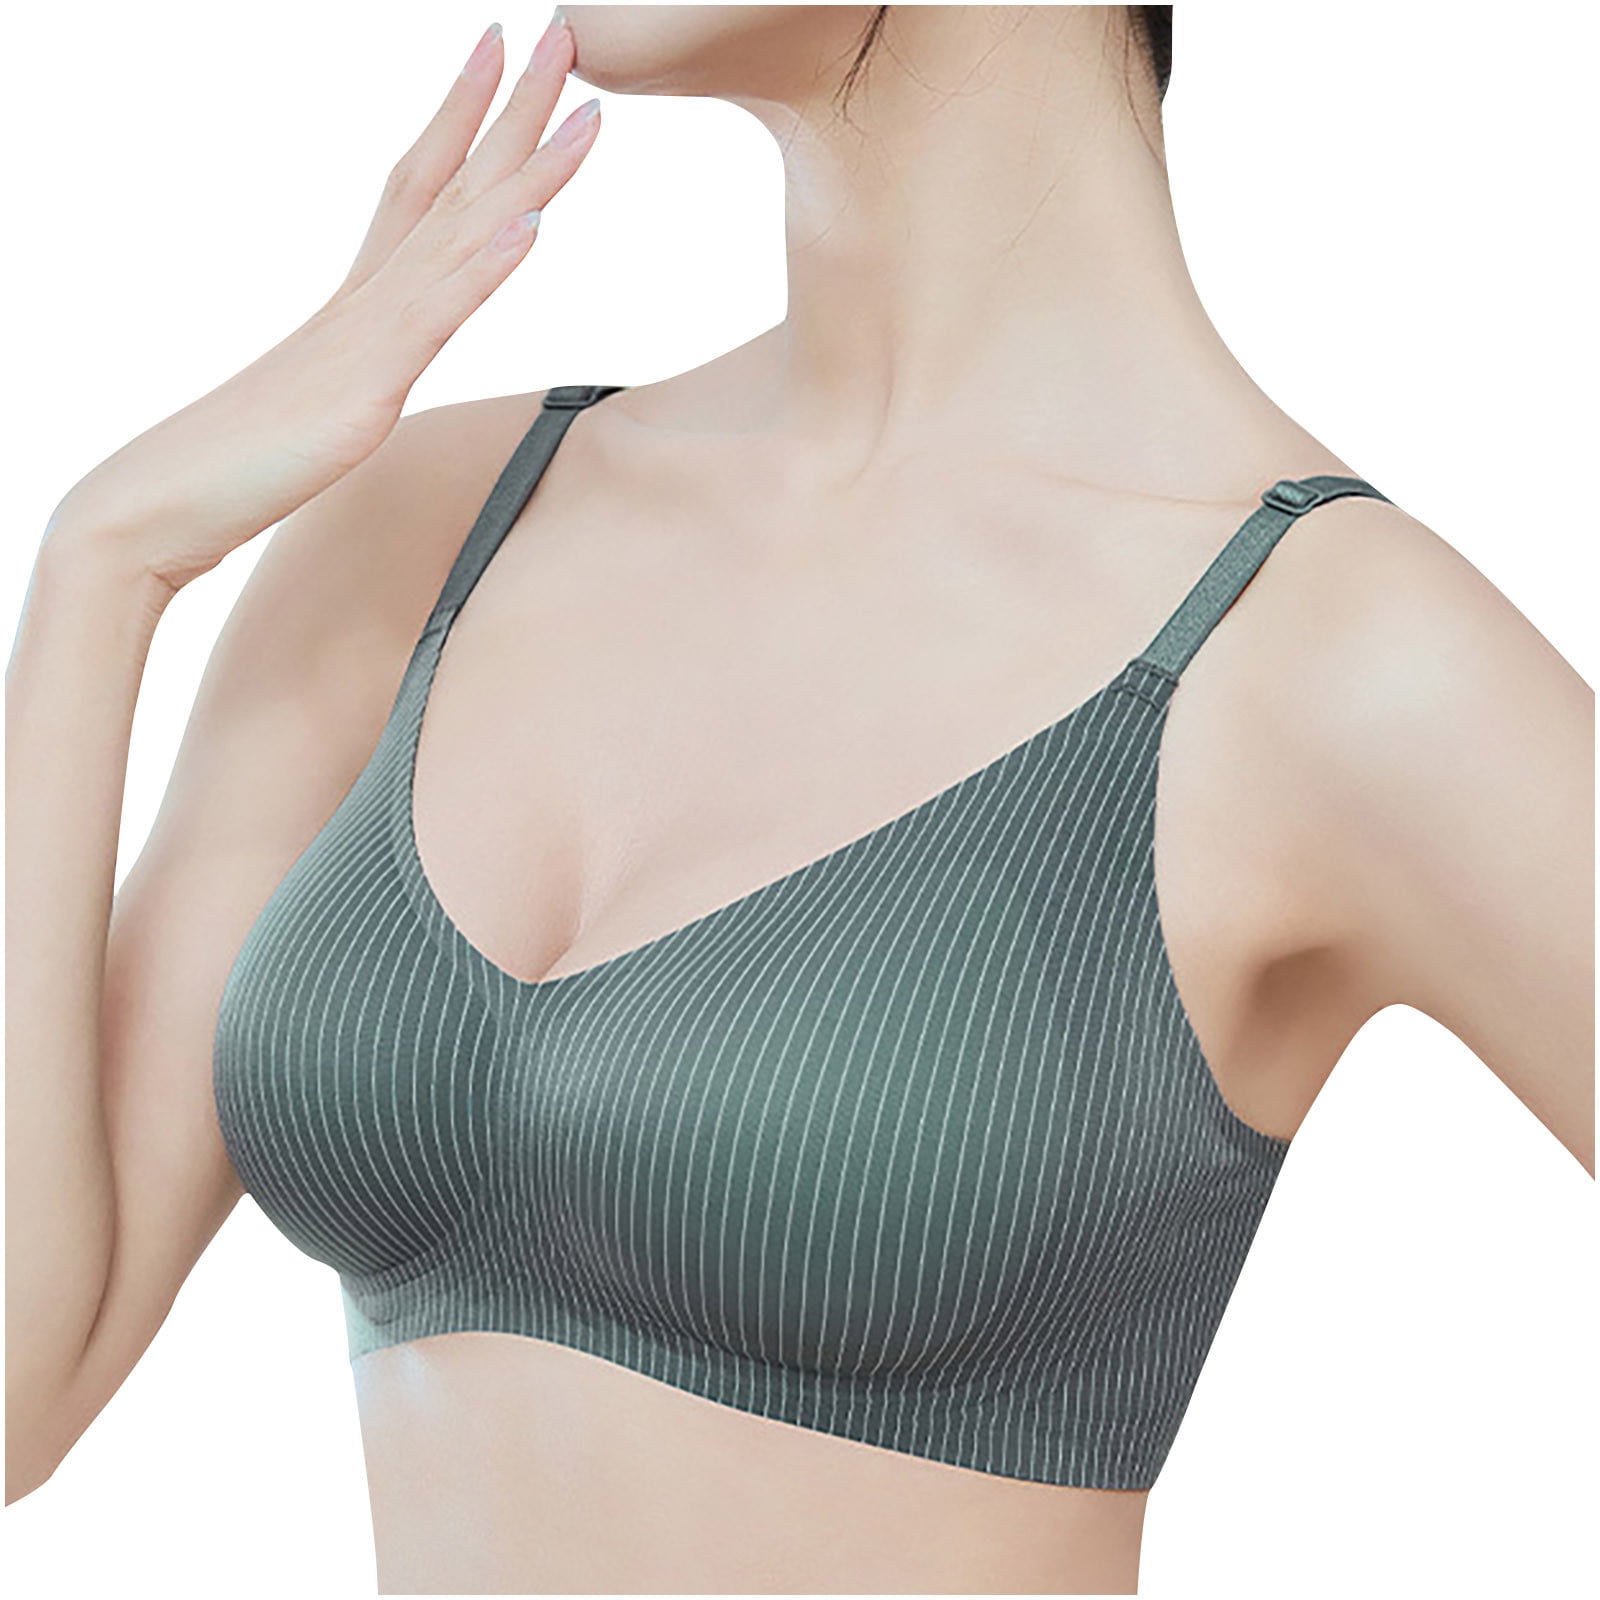 Mrat Clearance Womens Sports Bras Supportive Tshirt No Underwire